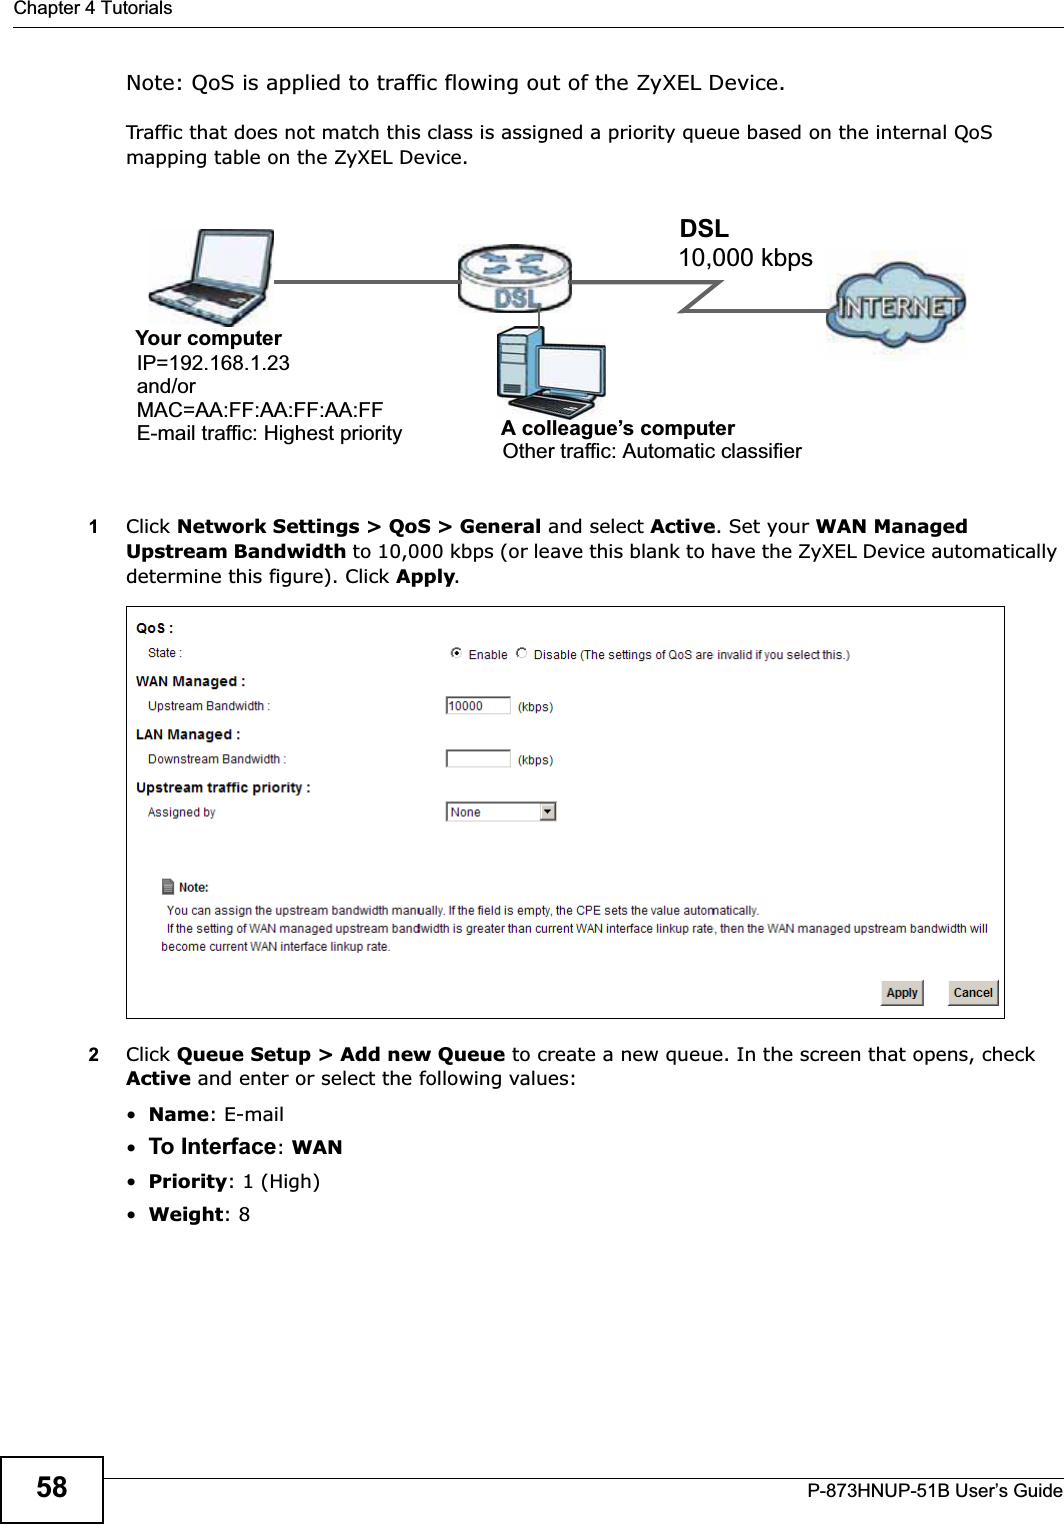 Chapter 4 TutorialsP-873HNUP-51B User’s Guide58Note: QoS is applied to traffic flowing out of the ZyXEL Device.Traffic that does not match this class is assigned a priority queue based on the internal QoS mapping table on the ZyXEL Device.QoS Example1Click Network Settings &gt; QoS &gt; General and select Active. Set your WAN Managed Upstream Bandwidth to 10,000 kbps (or leave this blank to have the ZyXEL Device automatically determine this figure). Click Apply.Tutorial: Advanced &gt; QoS 2Click Queue Setup &gt; Add new Queue to create a new queue. In the screen that opens, check Active and enter or select the following values:•Name: E-mail•To Interface:WAN•Priority: 1 (High)•Weight: 810,000 kbpsDSLYour computerIP=192.168.1.23A colleague’s computerOther traffic: Automatic classifierand/orMAC=AA:FF:AA:FF:AA:FFE-mail traffic: Highest priority